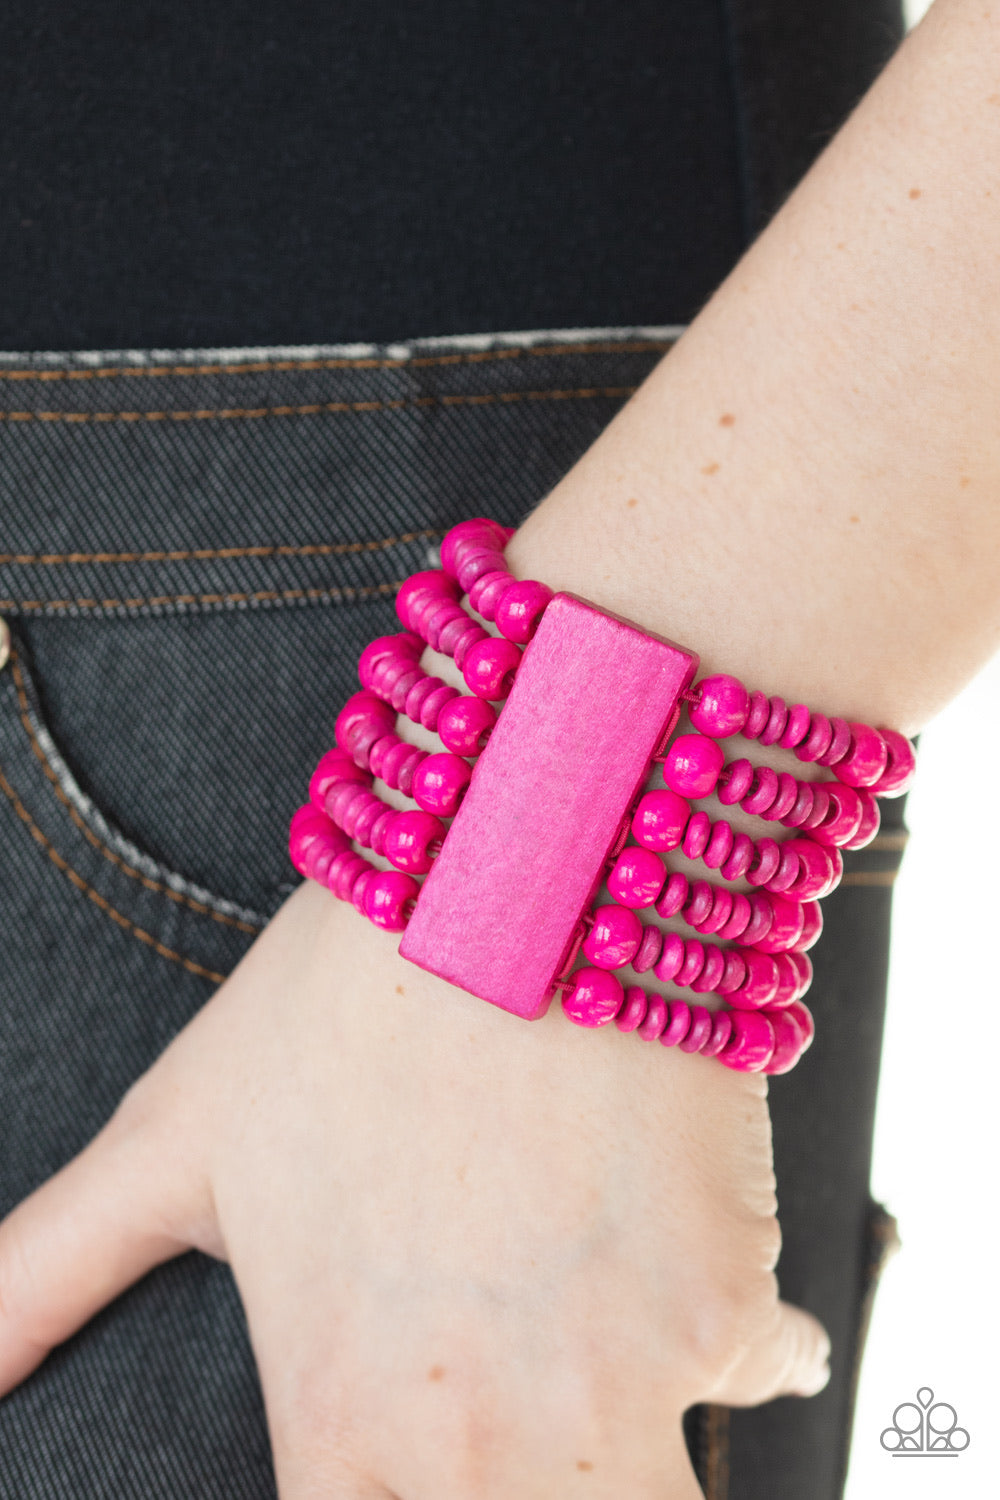 Don’t Stop Belize-ing -Pink - Classy Elite Jewelry